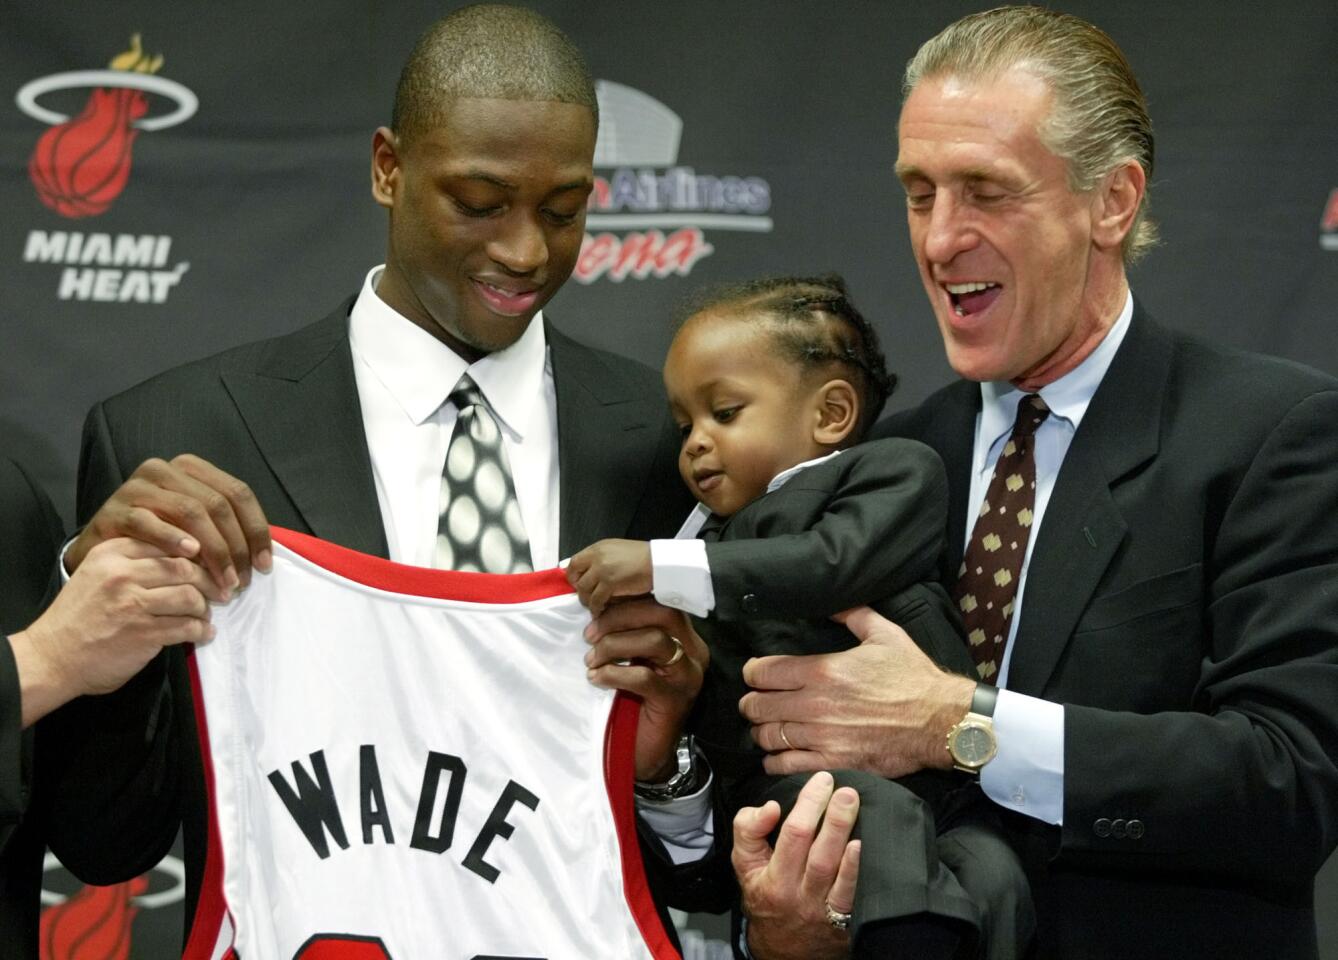 Dwyane Wade, left, former Marquette point guard and the fifth overall selection in the 2003 NBA draft, gets a little help holding up his jersey from his son Zaire, as Miami Heat coach Pat Riley, right, holds him during a news conference introducing Wade in Miami.